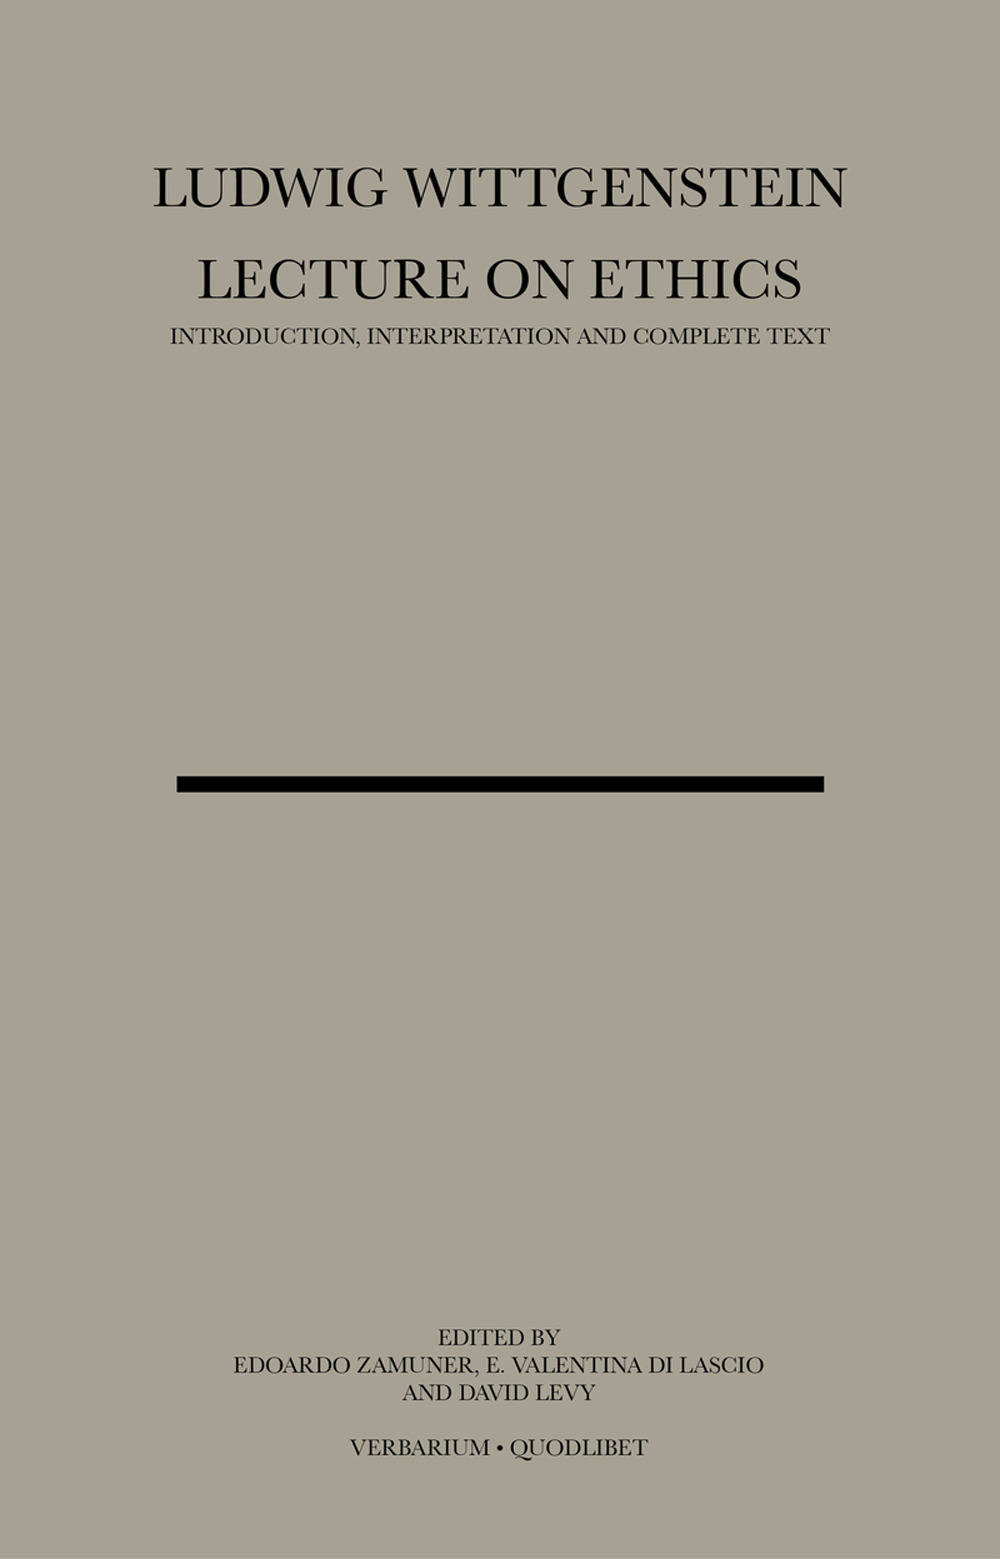 Lecture on ethics